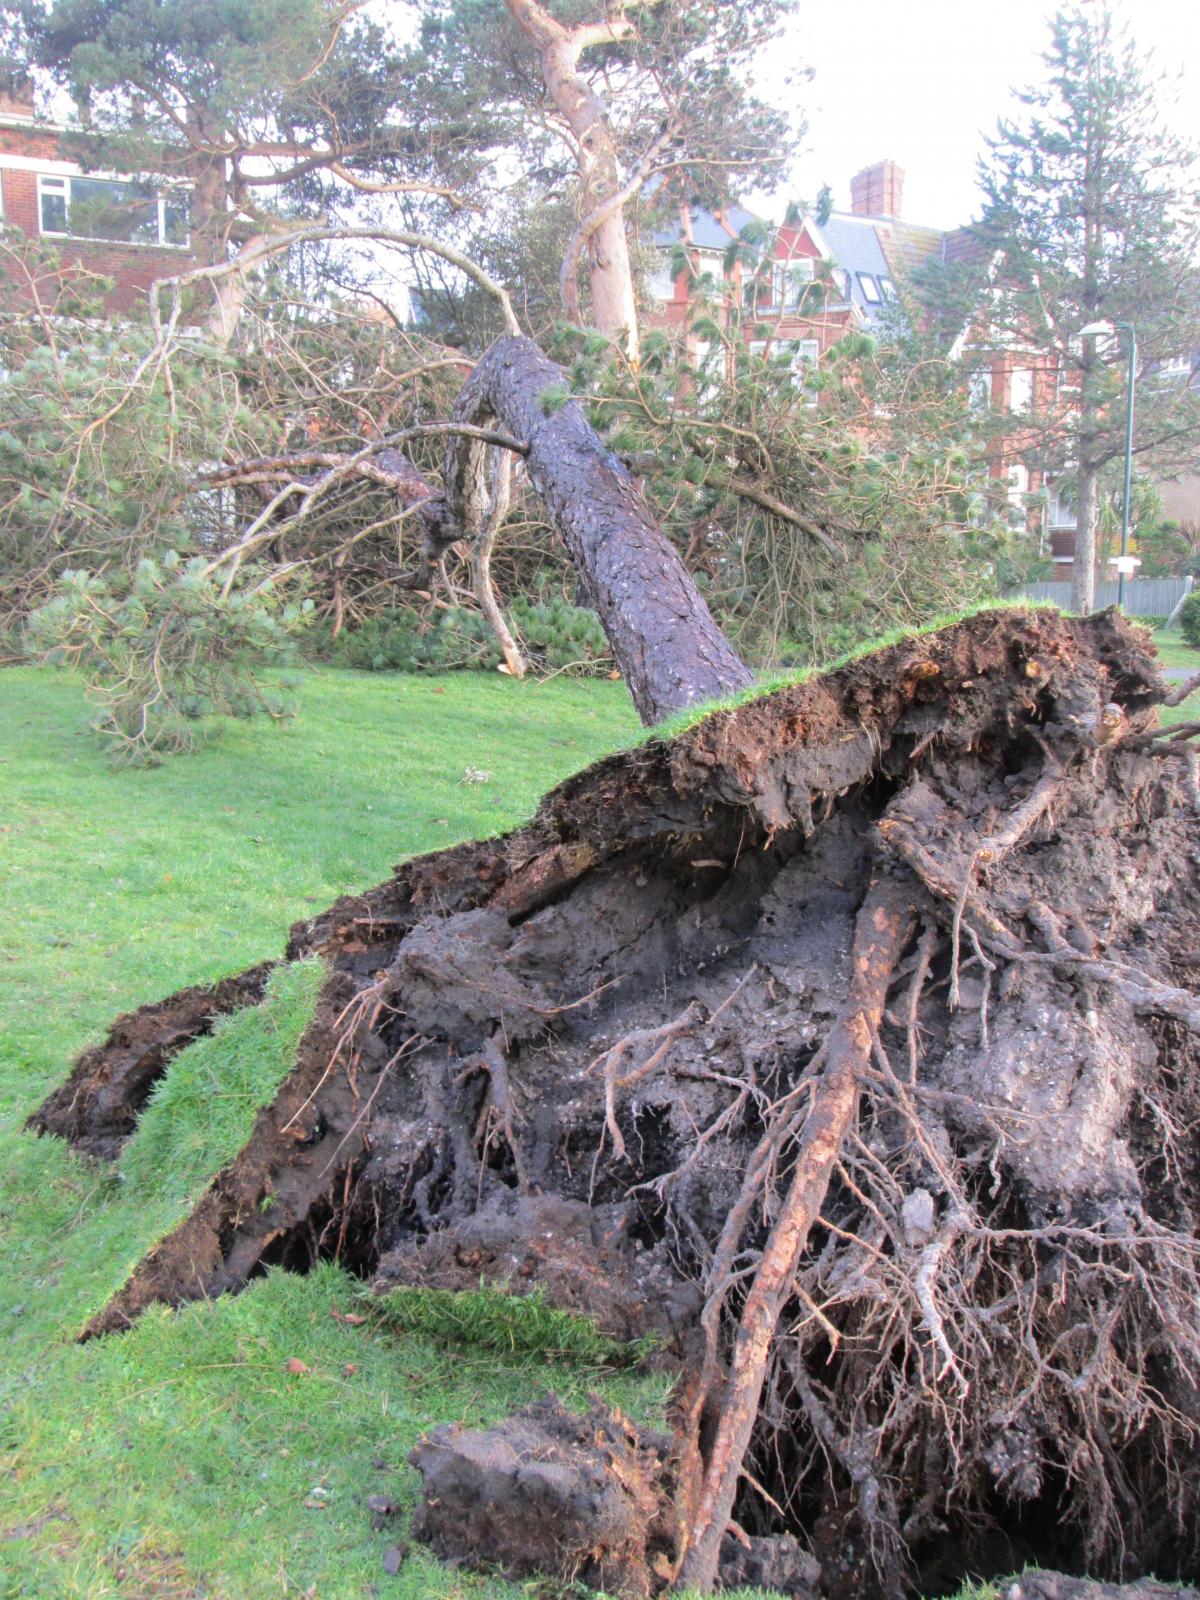 Daily Echo reader photos of the storm and damage left behind after severe weather swept through Dorset on February 14 and February 15. Picture sent by Chris Colledge of tree in West Cliff